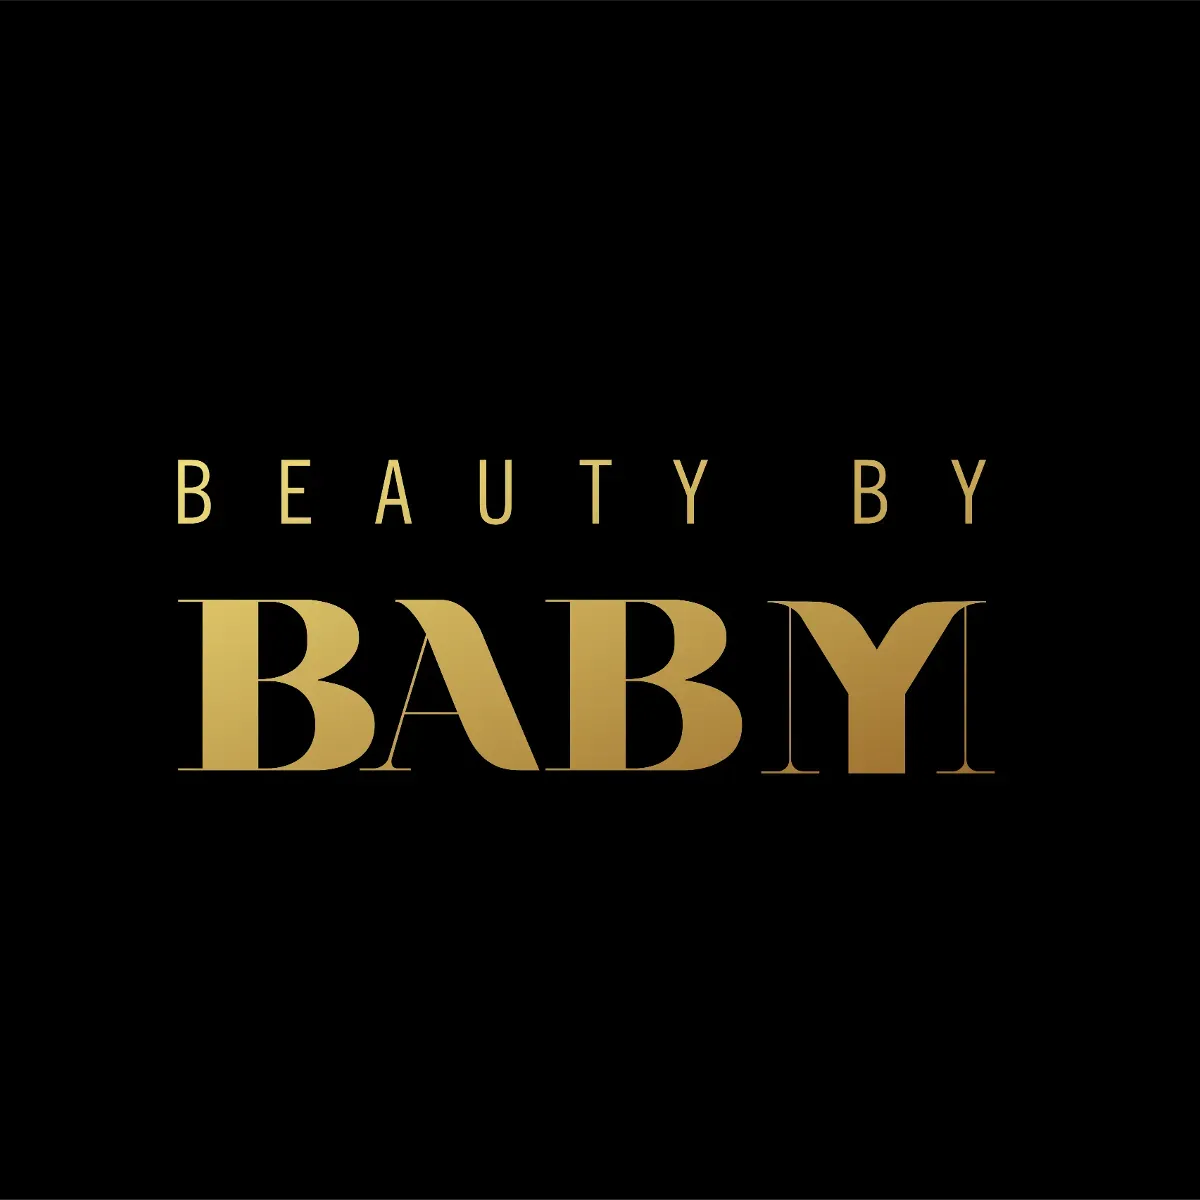 Beauty by Baby